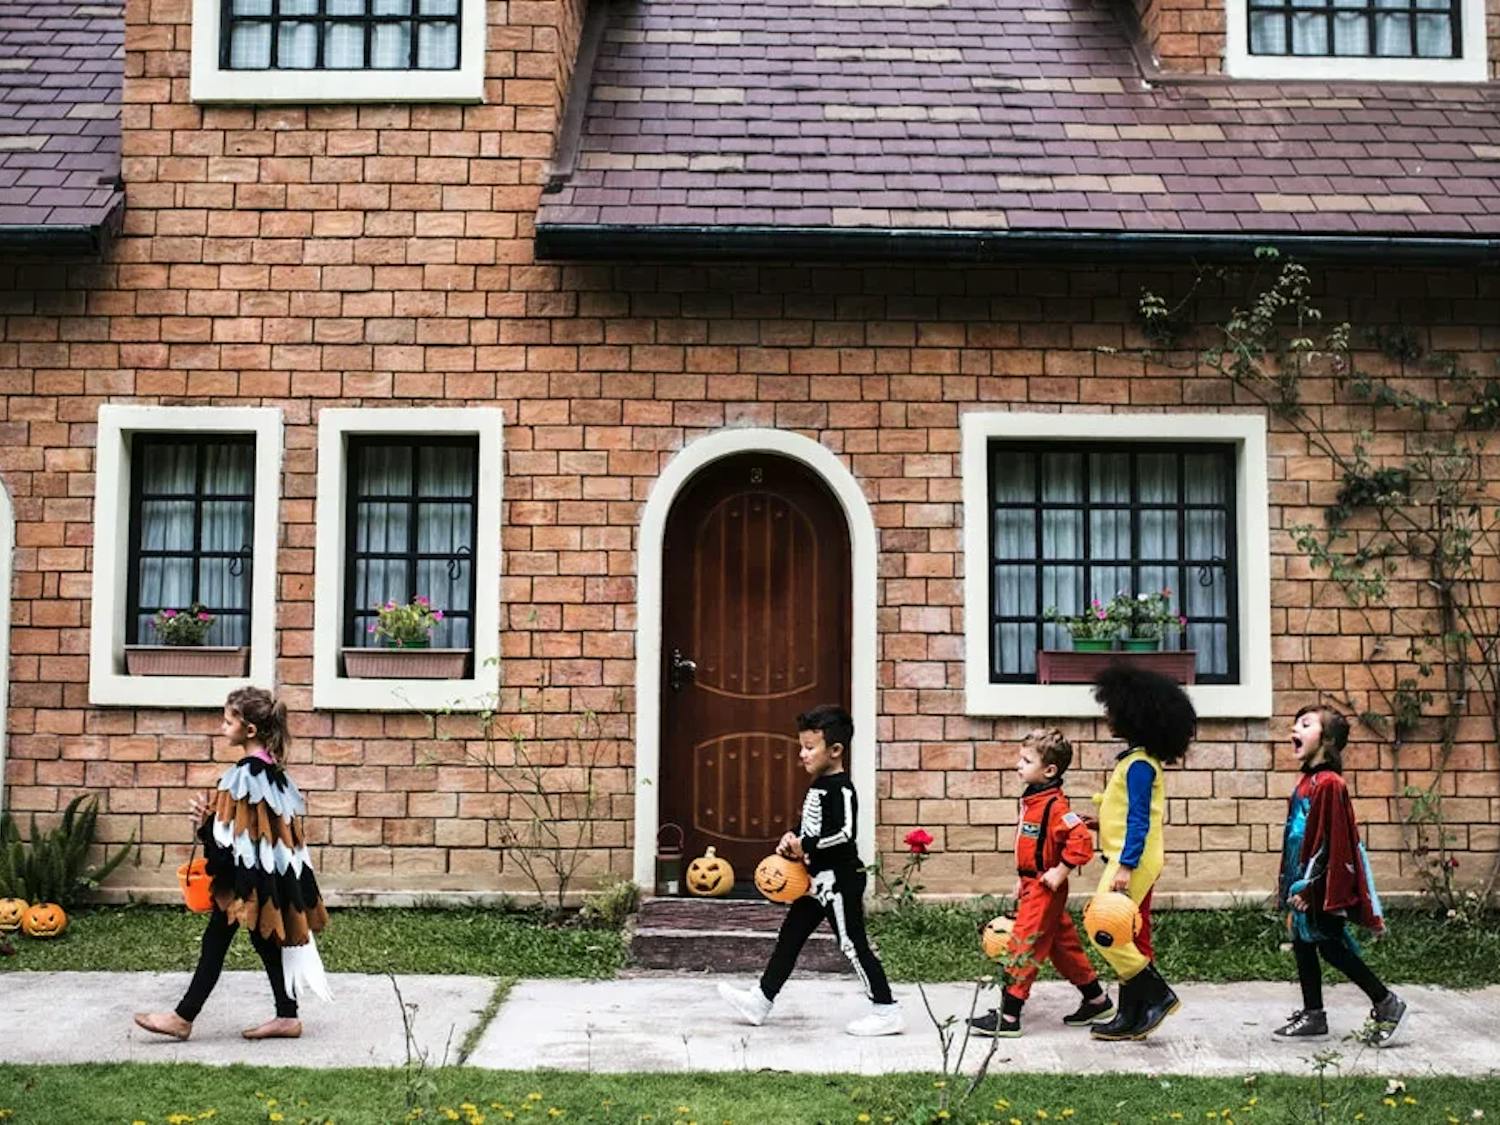 Kids trick or treating | Source: TinyBeans